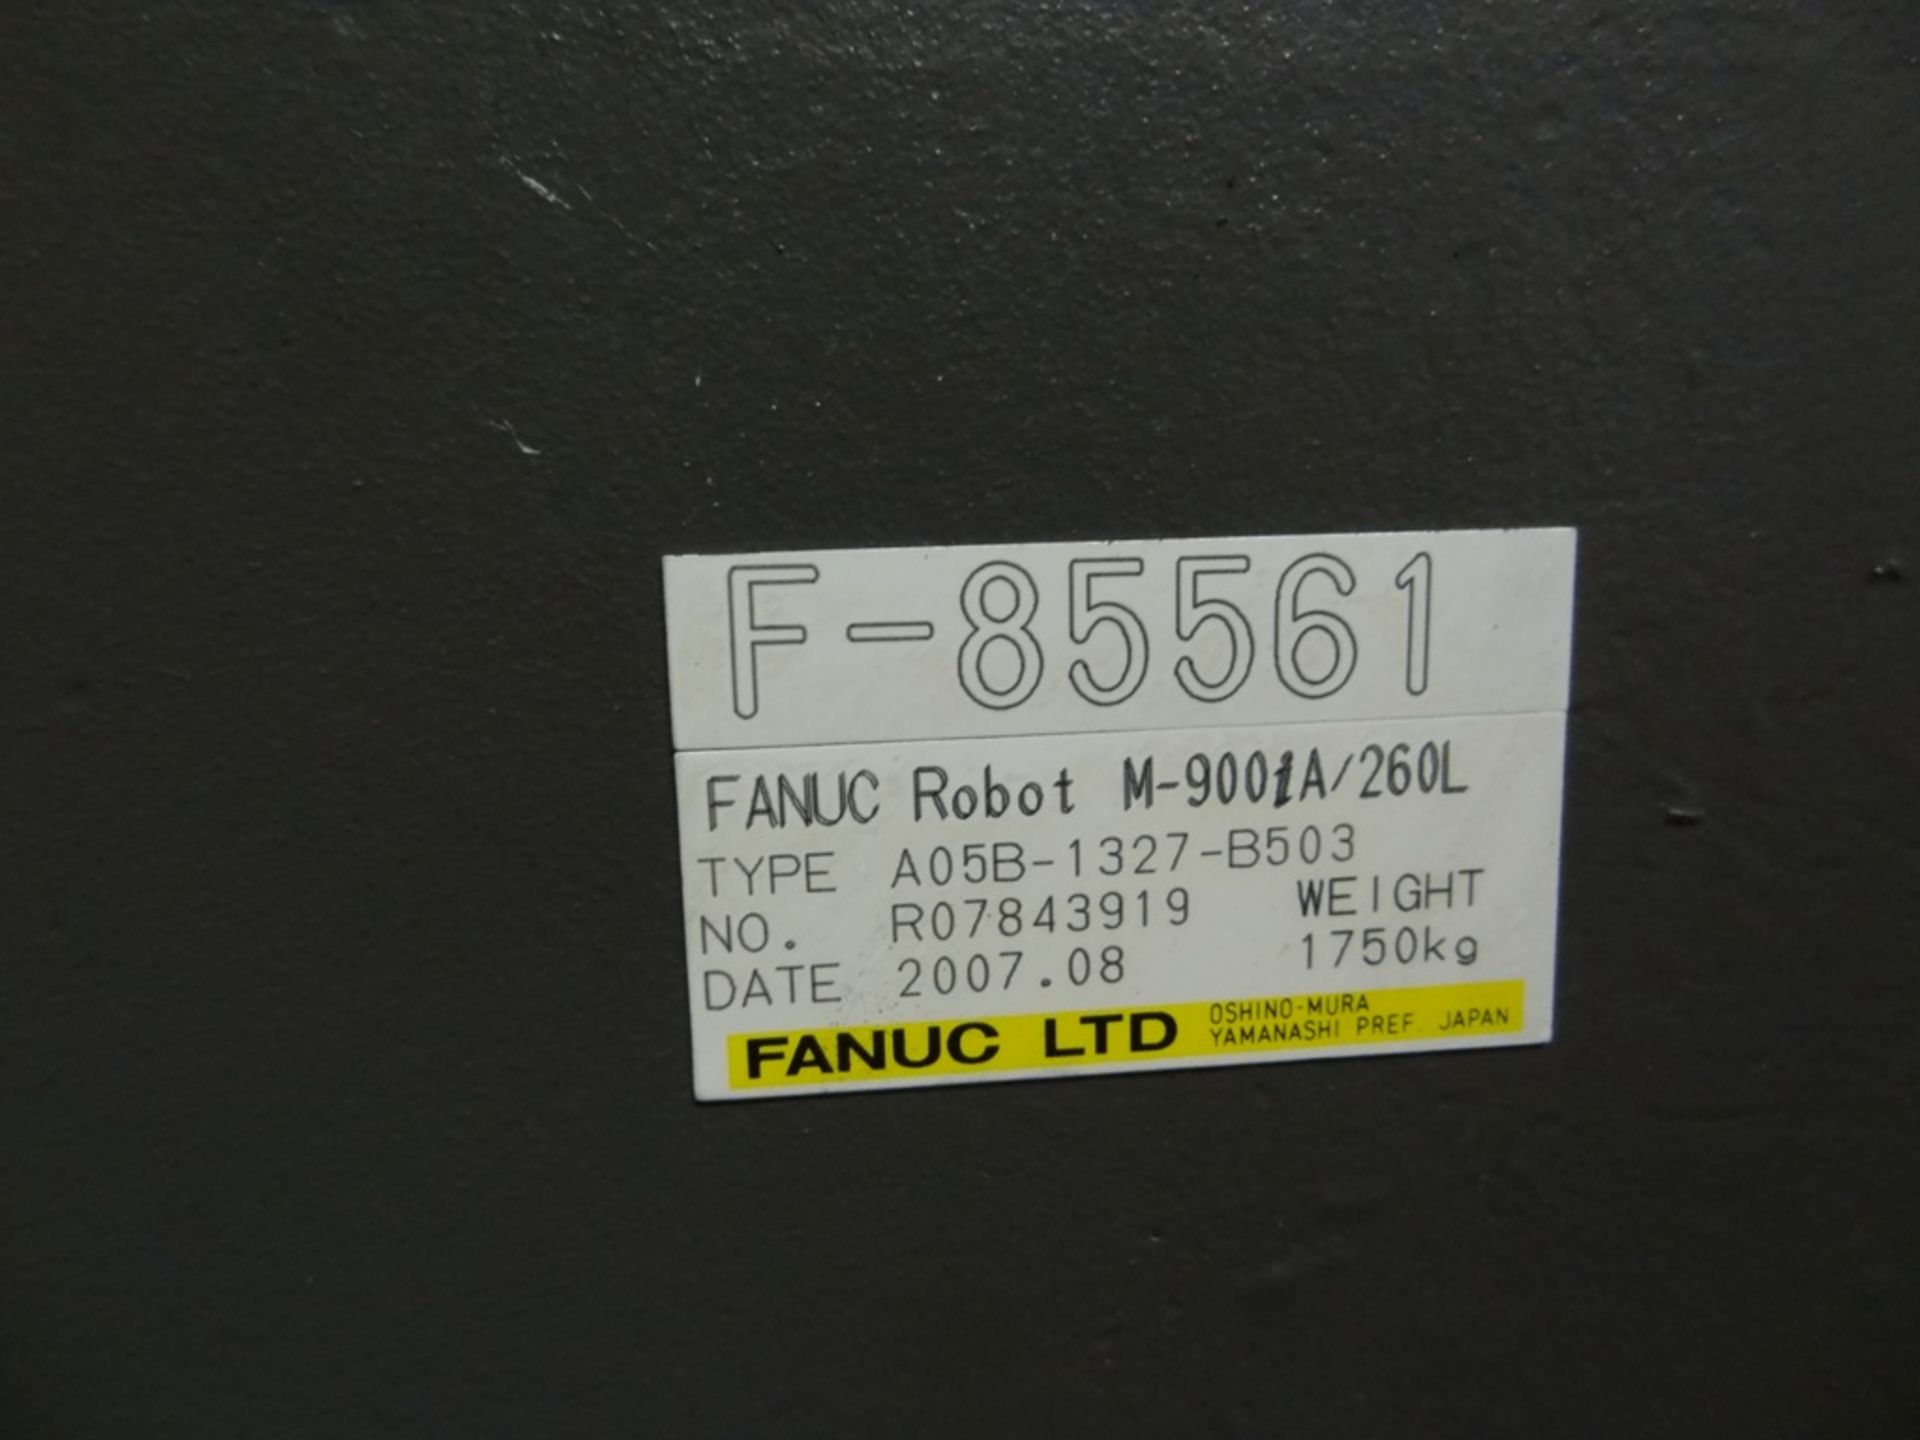 FANUC M900iA/260L 6 AXIS CNC ROBOT WITH R30iA CONTROLLER, SN F85561, LOCATION MI - Image 7 of 9